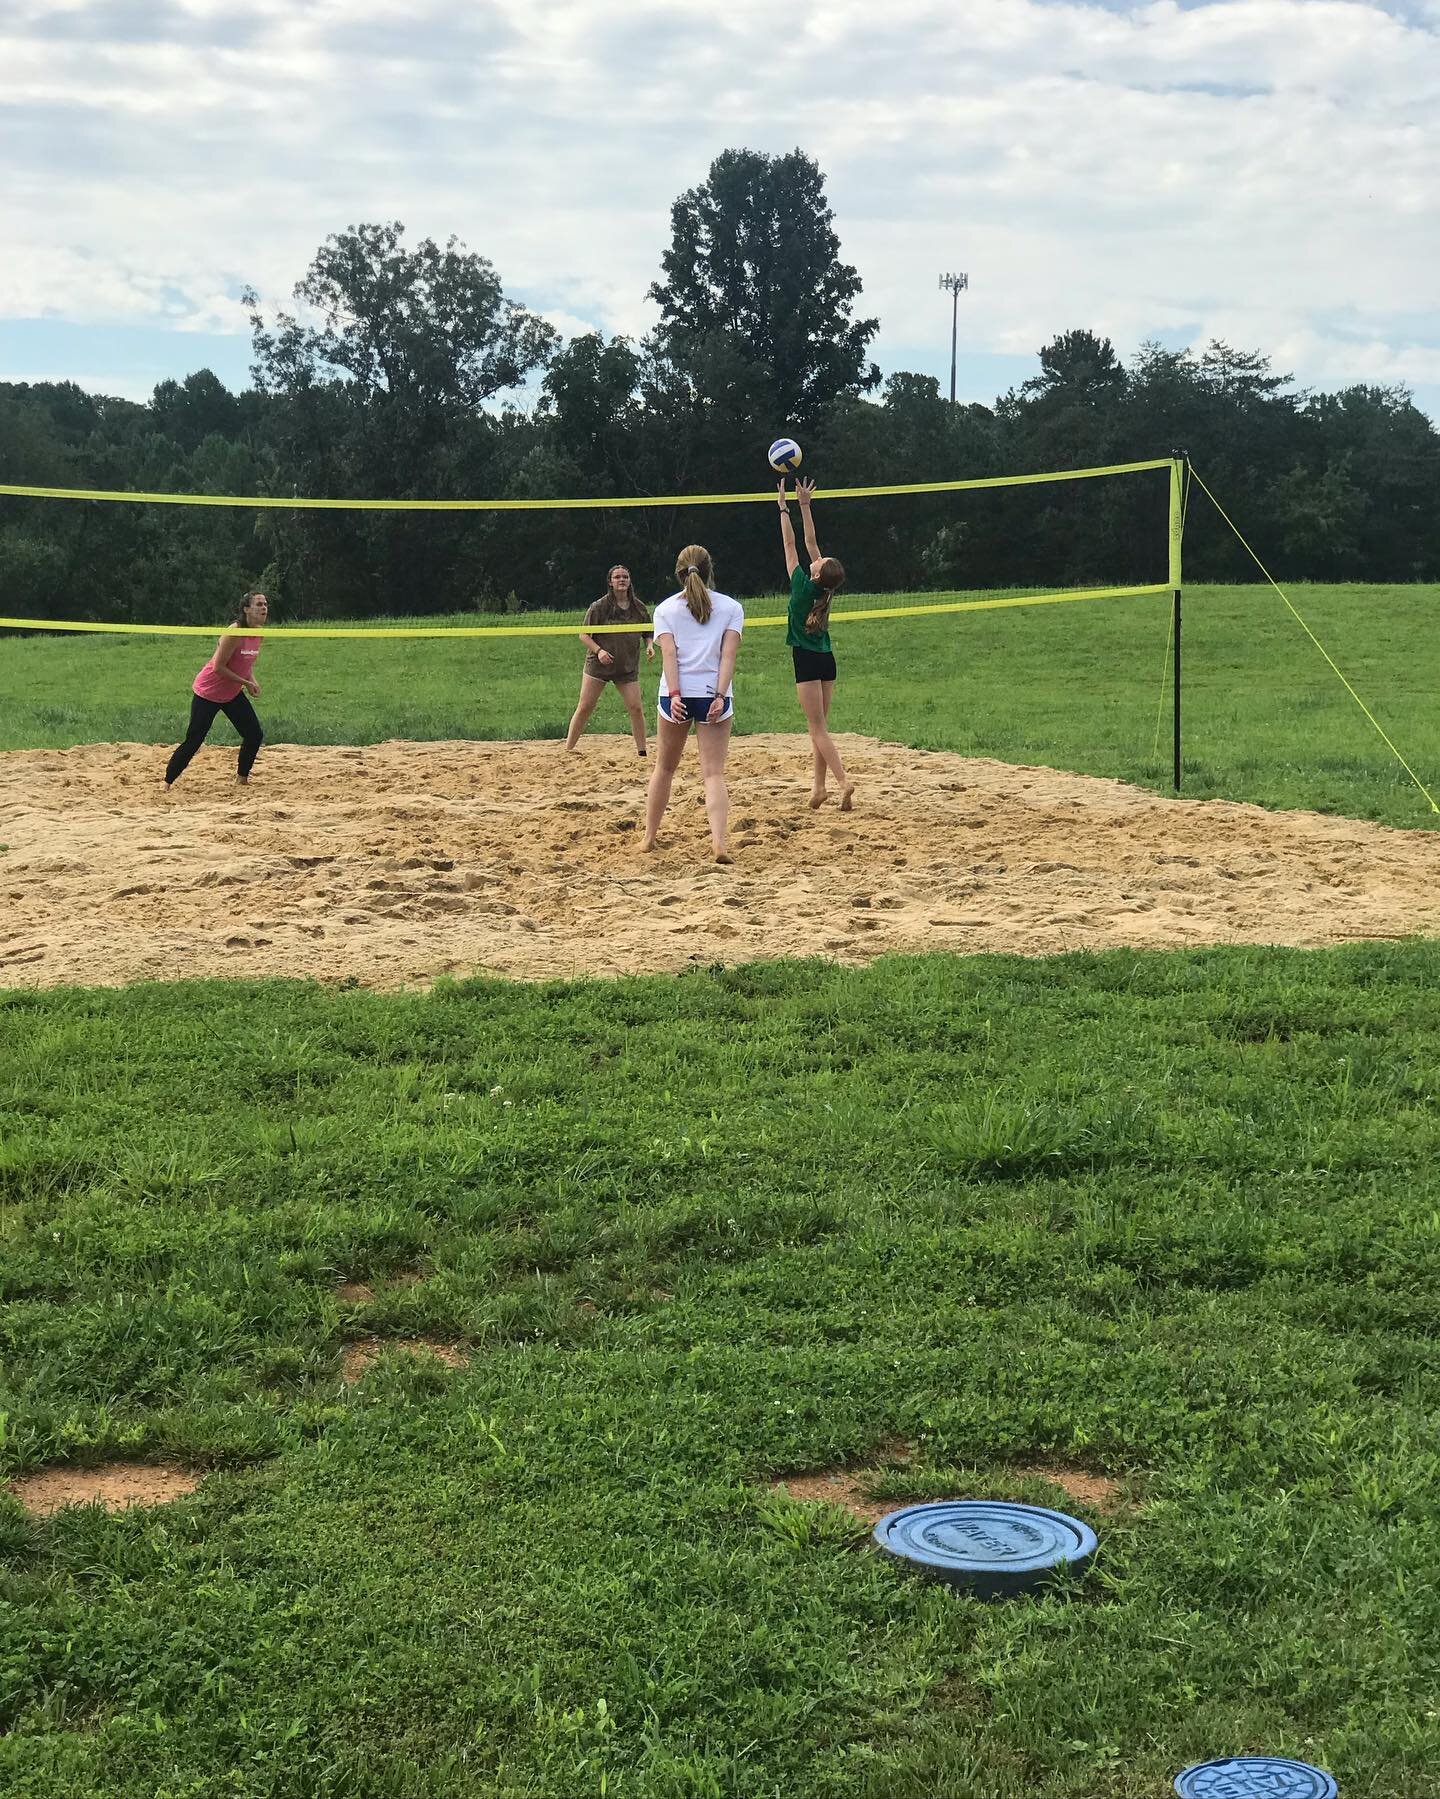 Our beach volleyball party is underway! Come join the fun. We have great food and music and lots to do for the whole family!